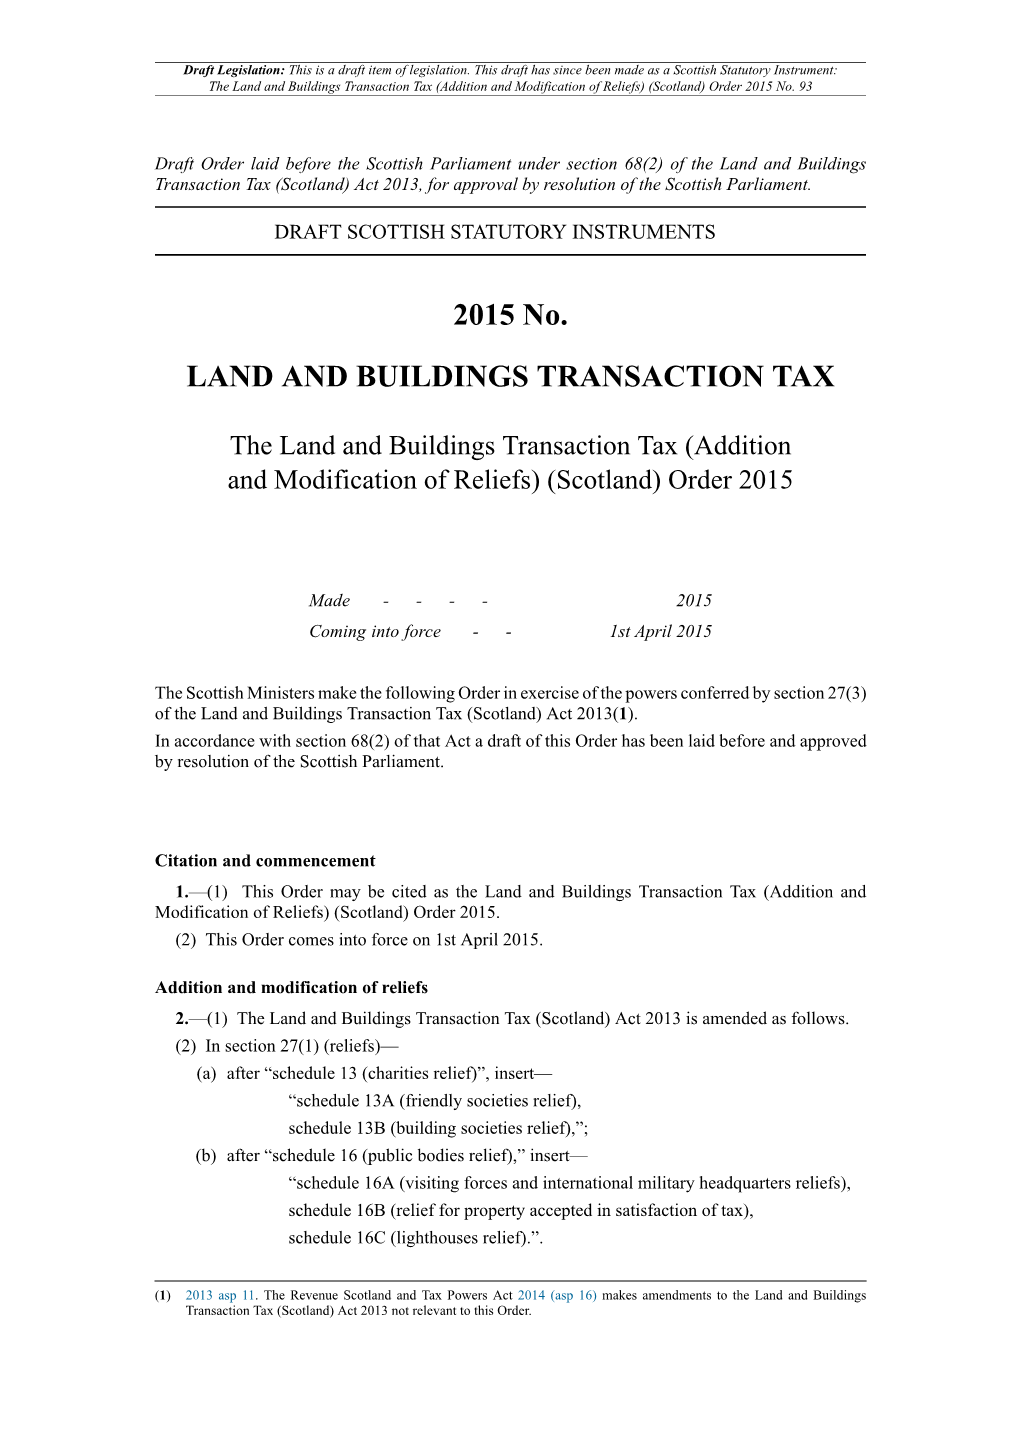 The Land and Buildings Transaction Tax (Addition and Modification of Reliefs) (Scotland) Order 2015 No